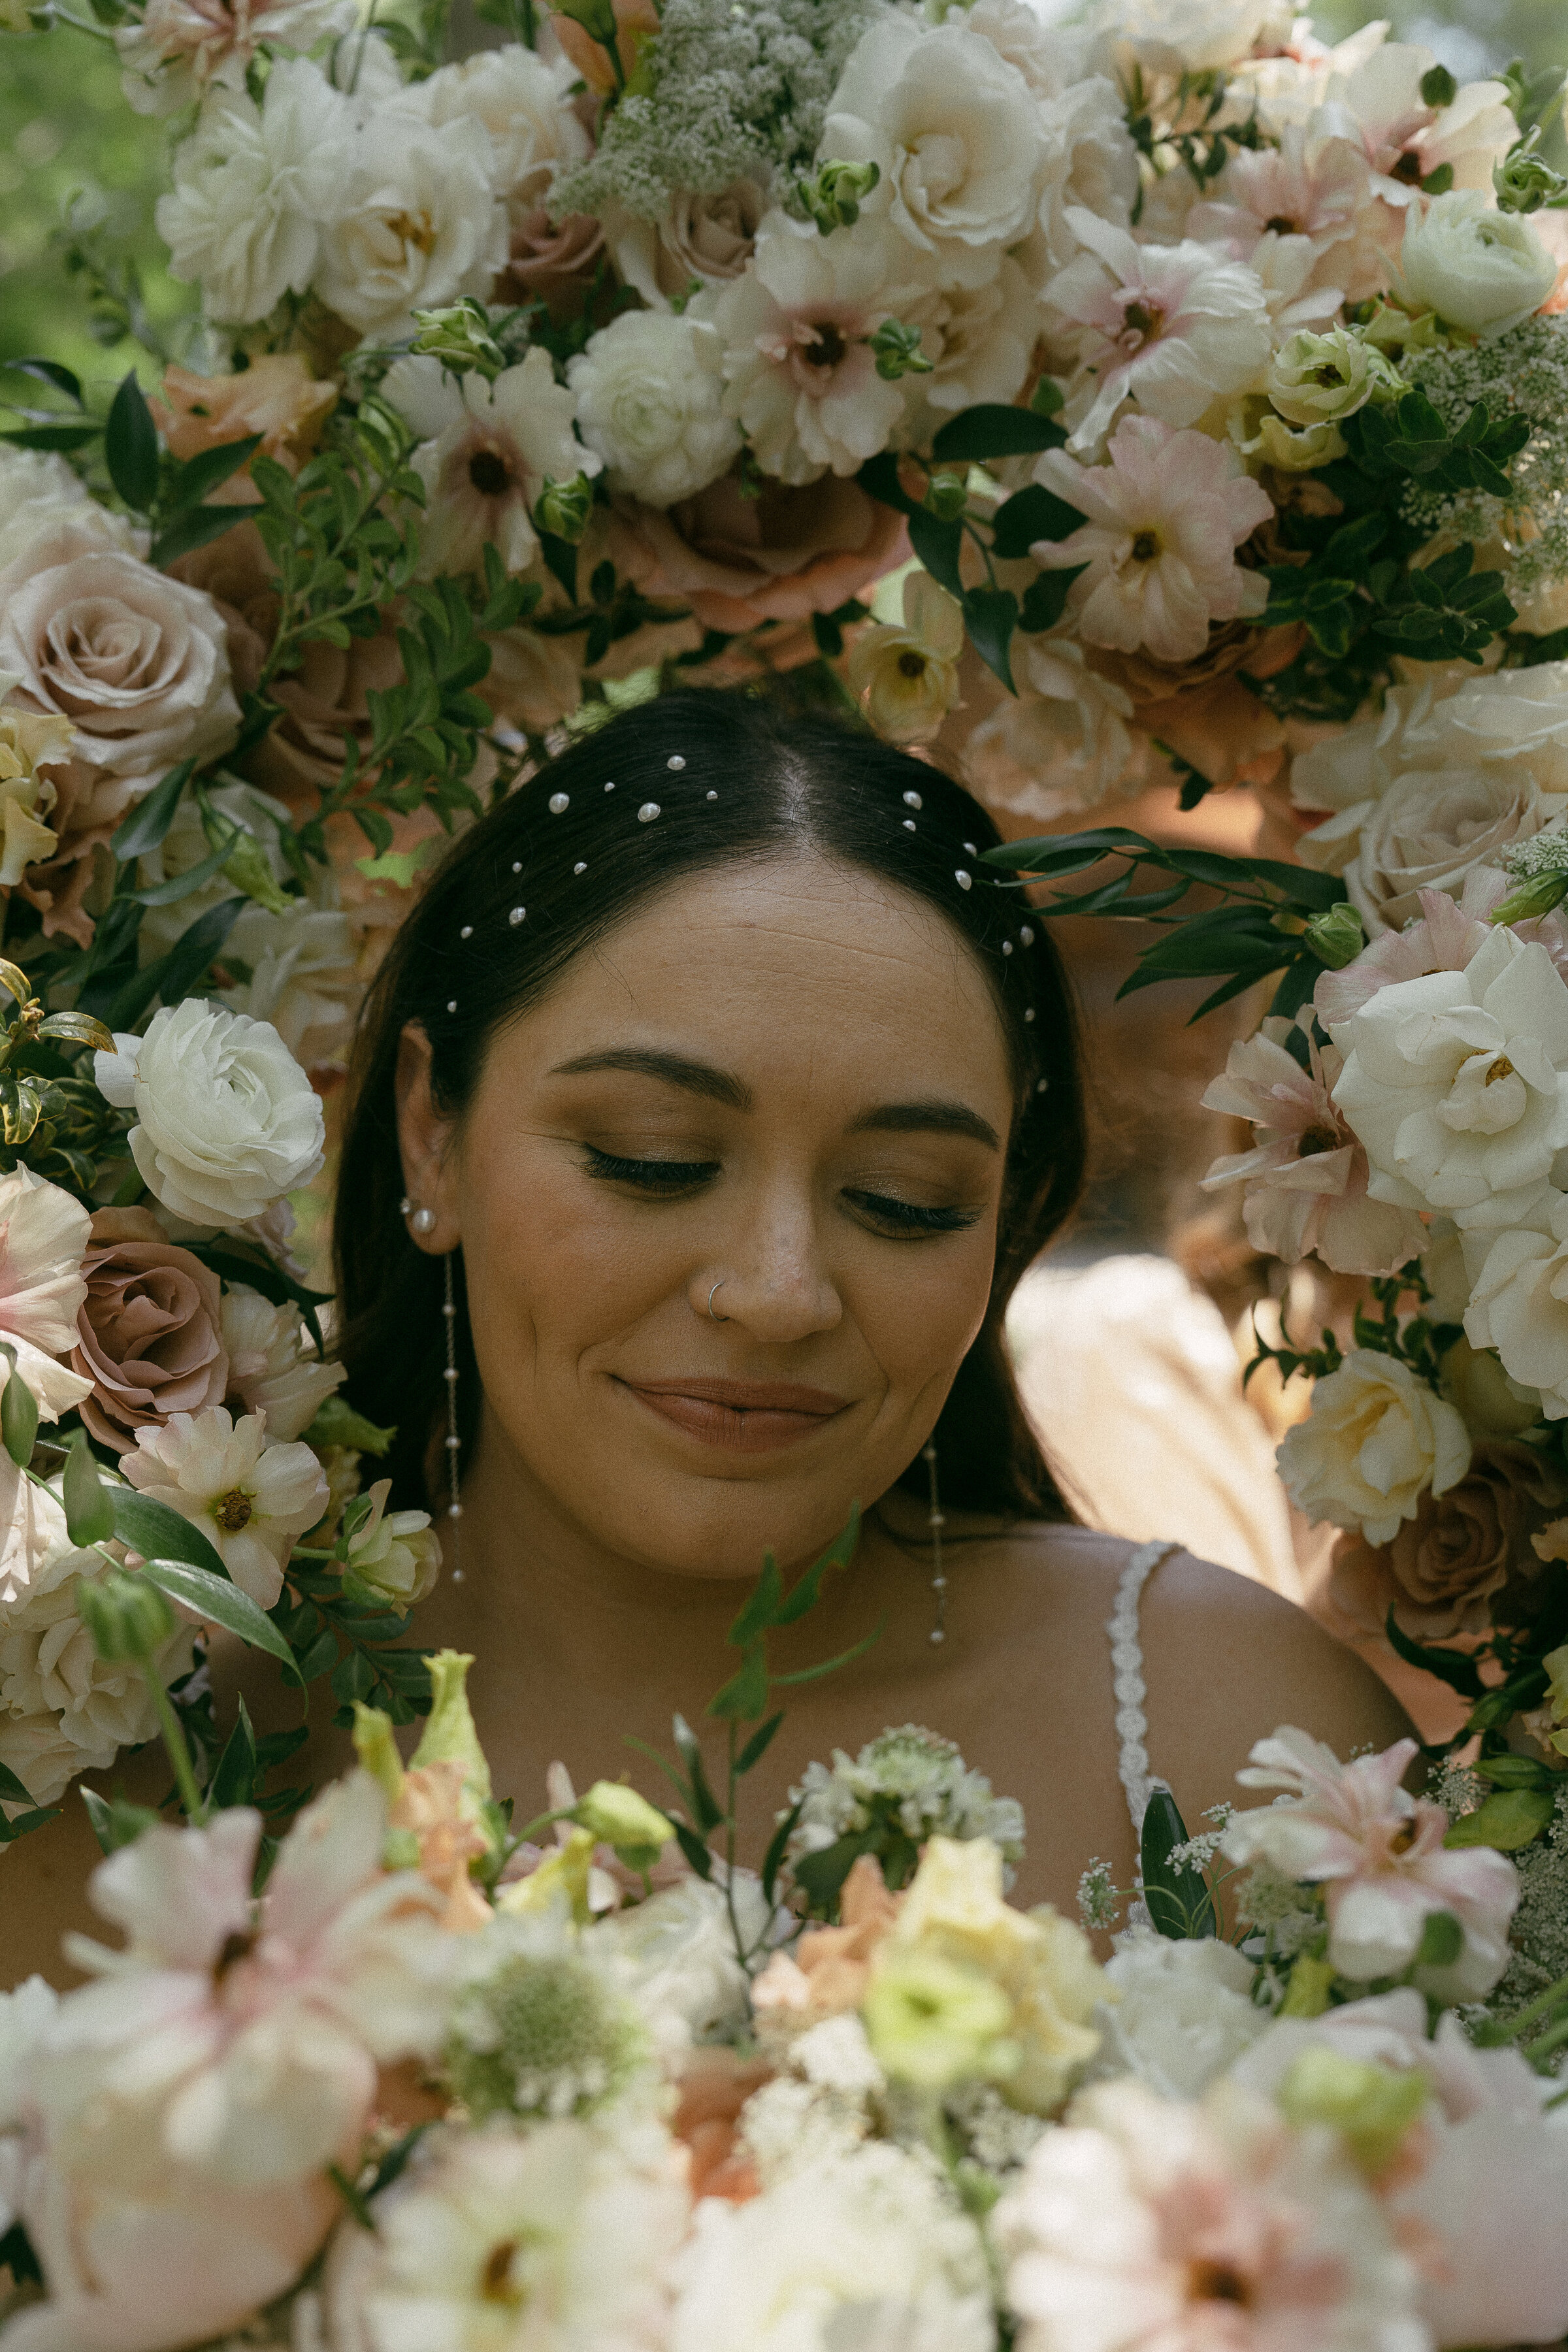 Bride surrounded by flowers, eyes closed, enjoying the moment.